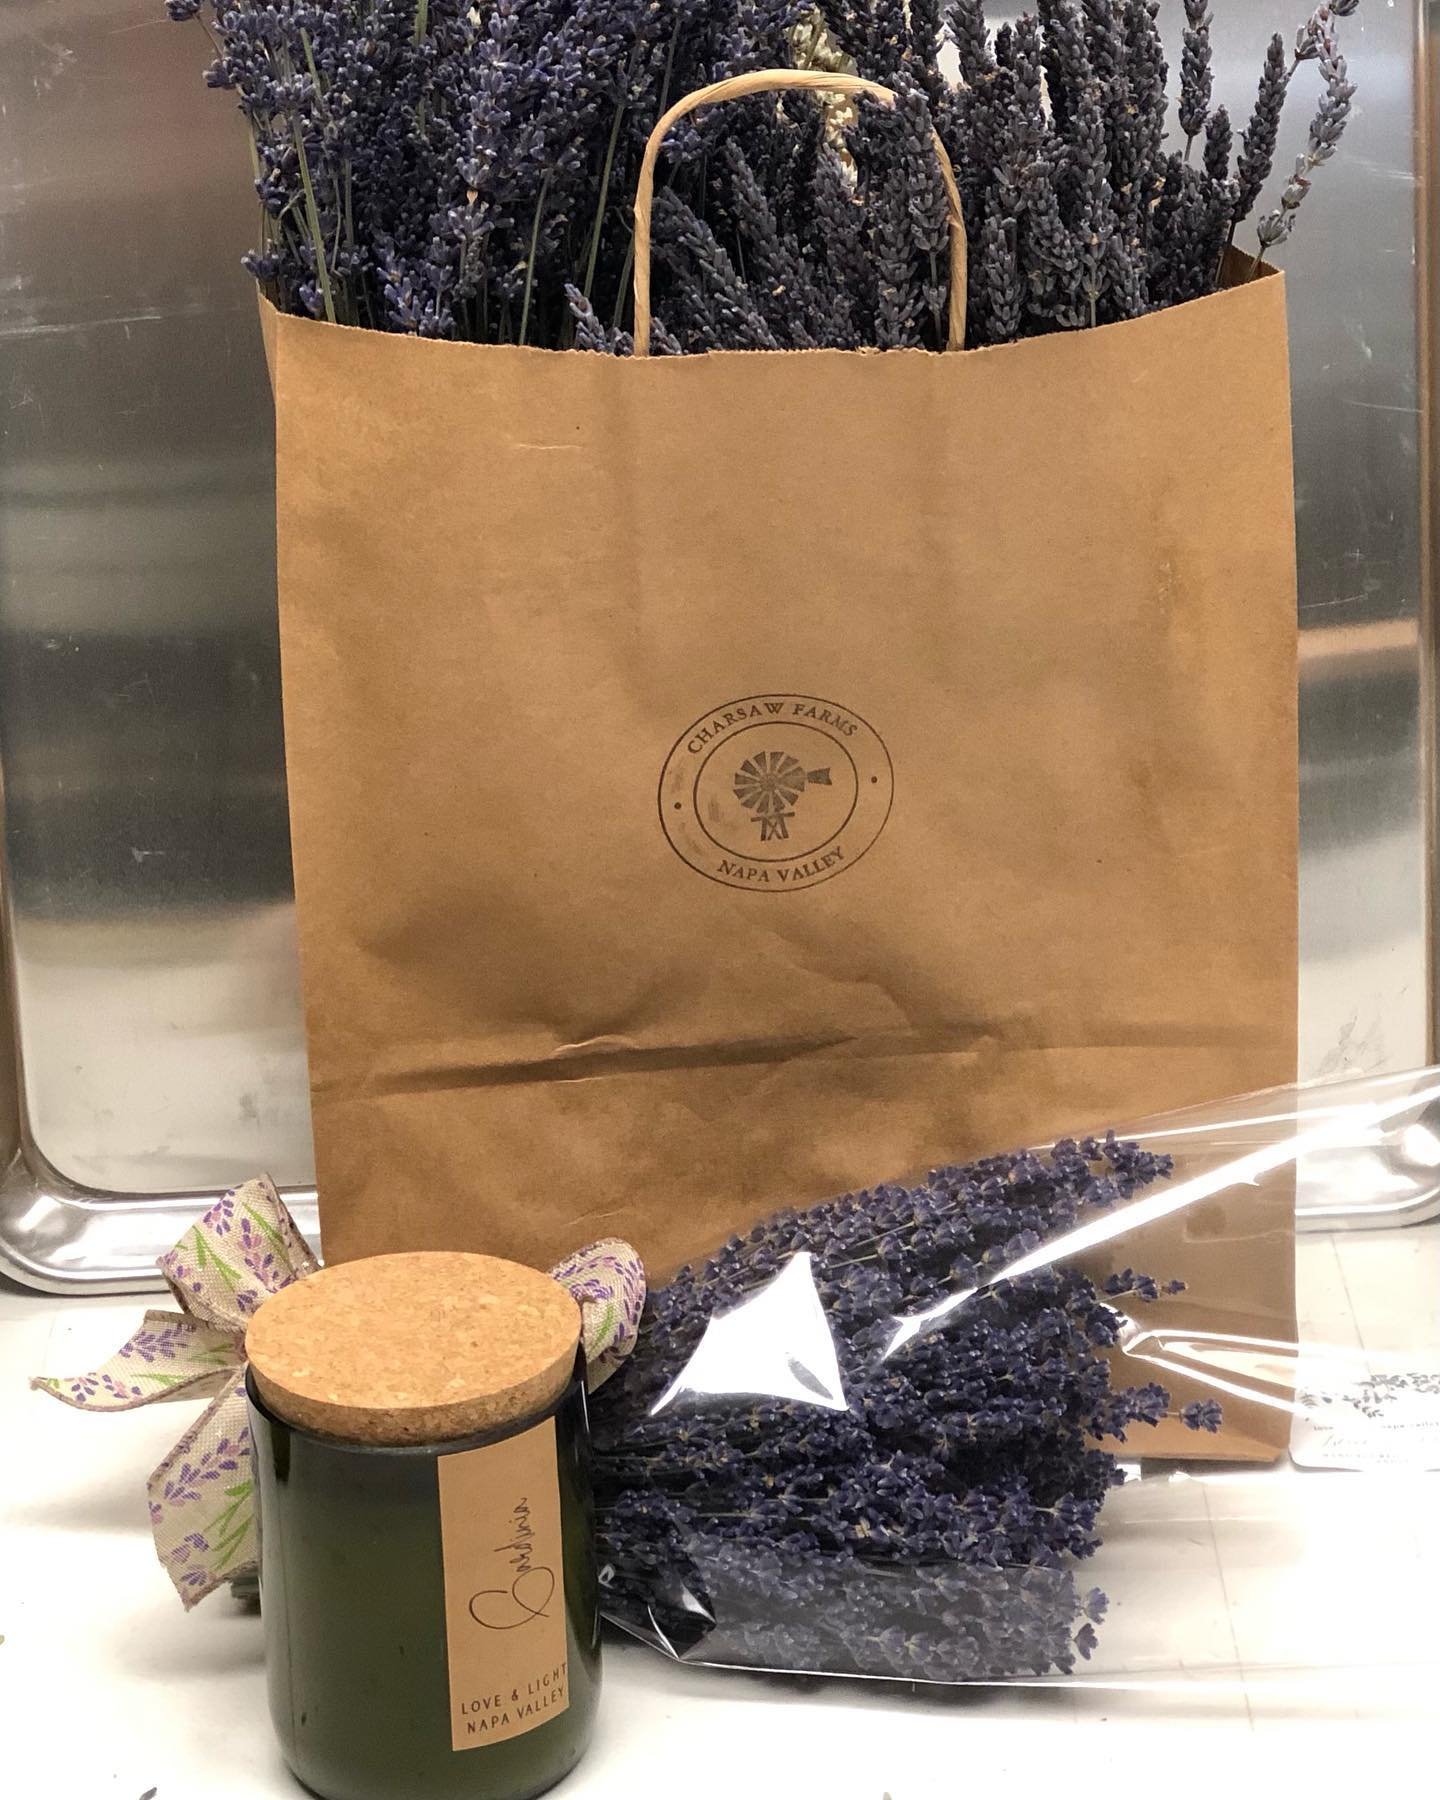 Thank you Charsaw Farms for the beautiful lavender. It adds the perfect special touch to our dried flower bouquets and gift boxes.